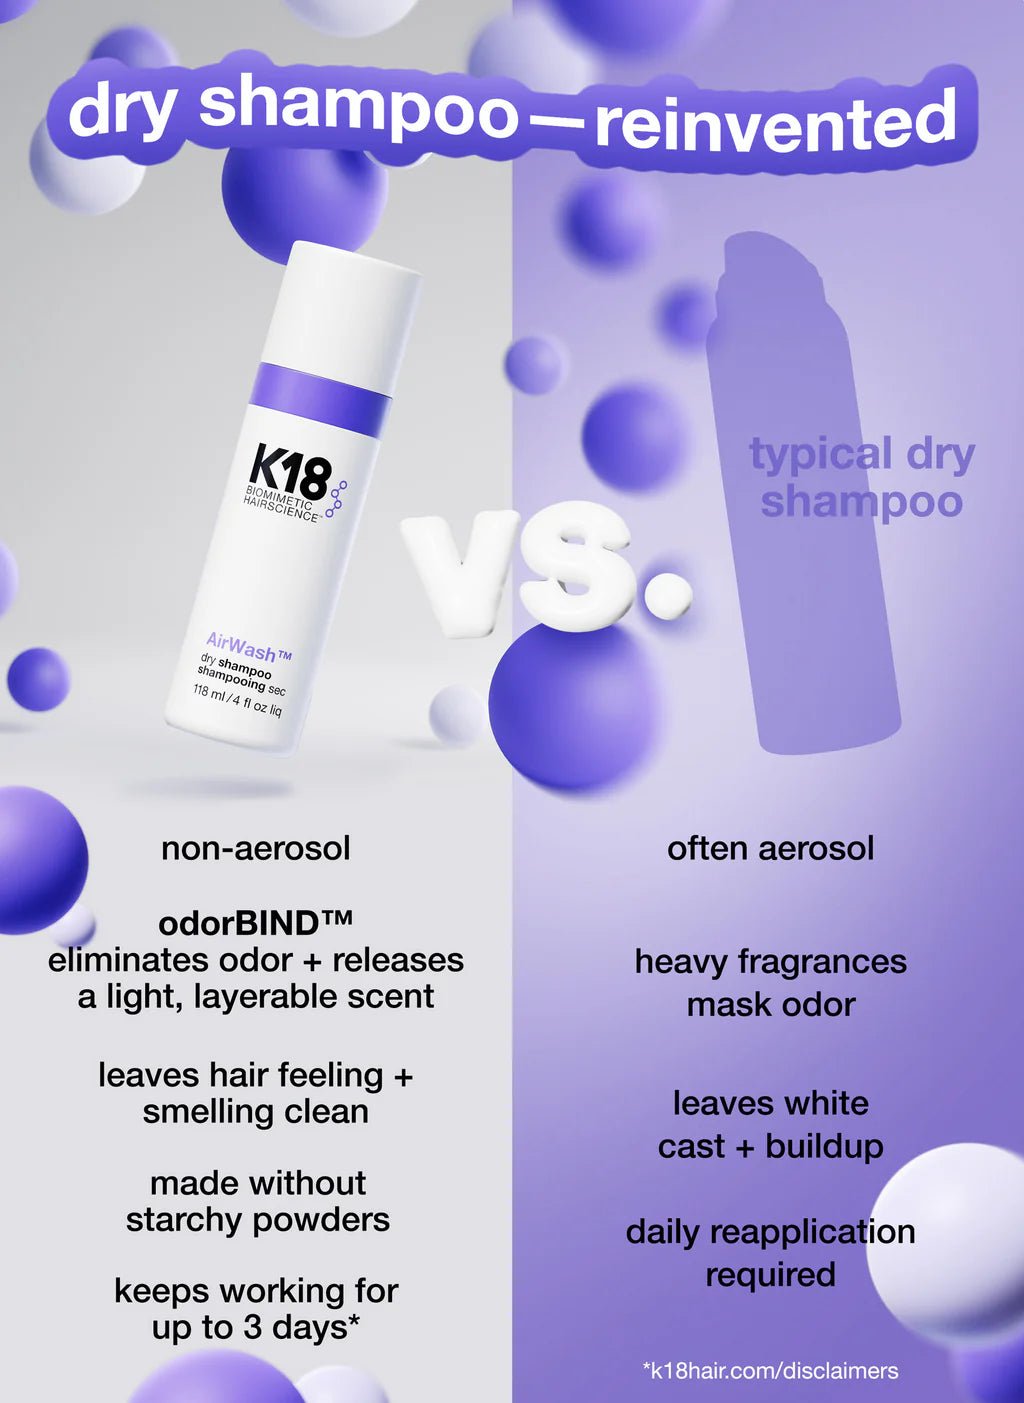 Comparison image of K18 AirWash Dry Shampoo vs. typical dry shampoo. Simply Colour Hair Salon Studio & Online Store's K18 AirWash Dry Shampoo is non-aerosol and utilizes odorBIND biotechnology to eliminate odor and reduce oil, leaving hair feeling light, while typical dry shampoo is often aerosol-based and masks odor with heavy fragrances.